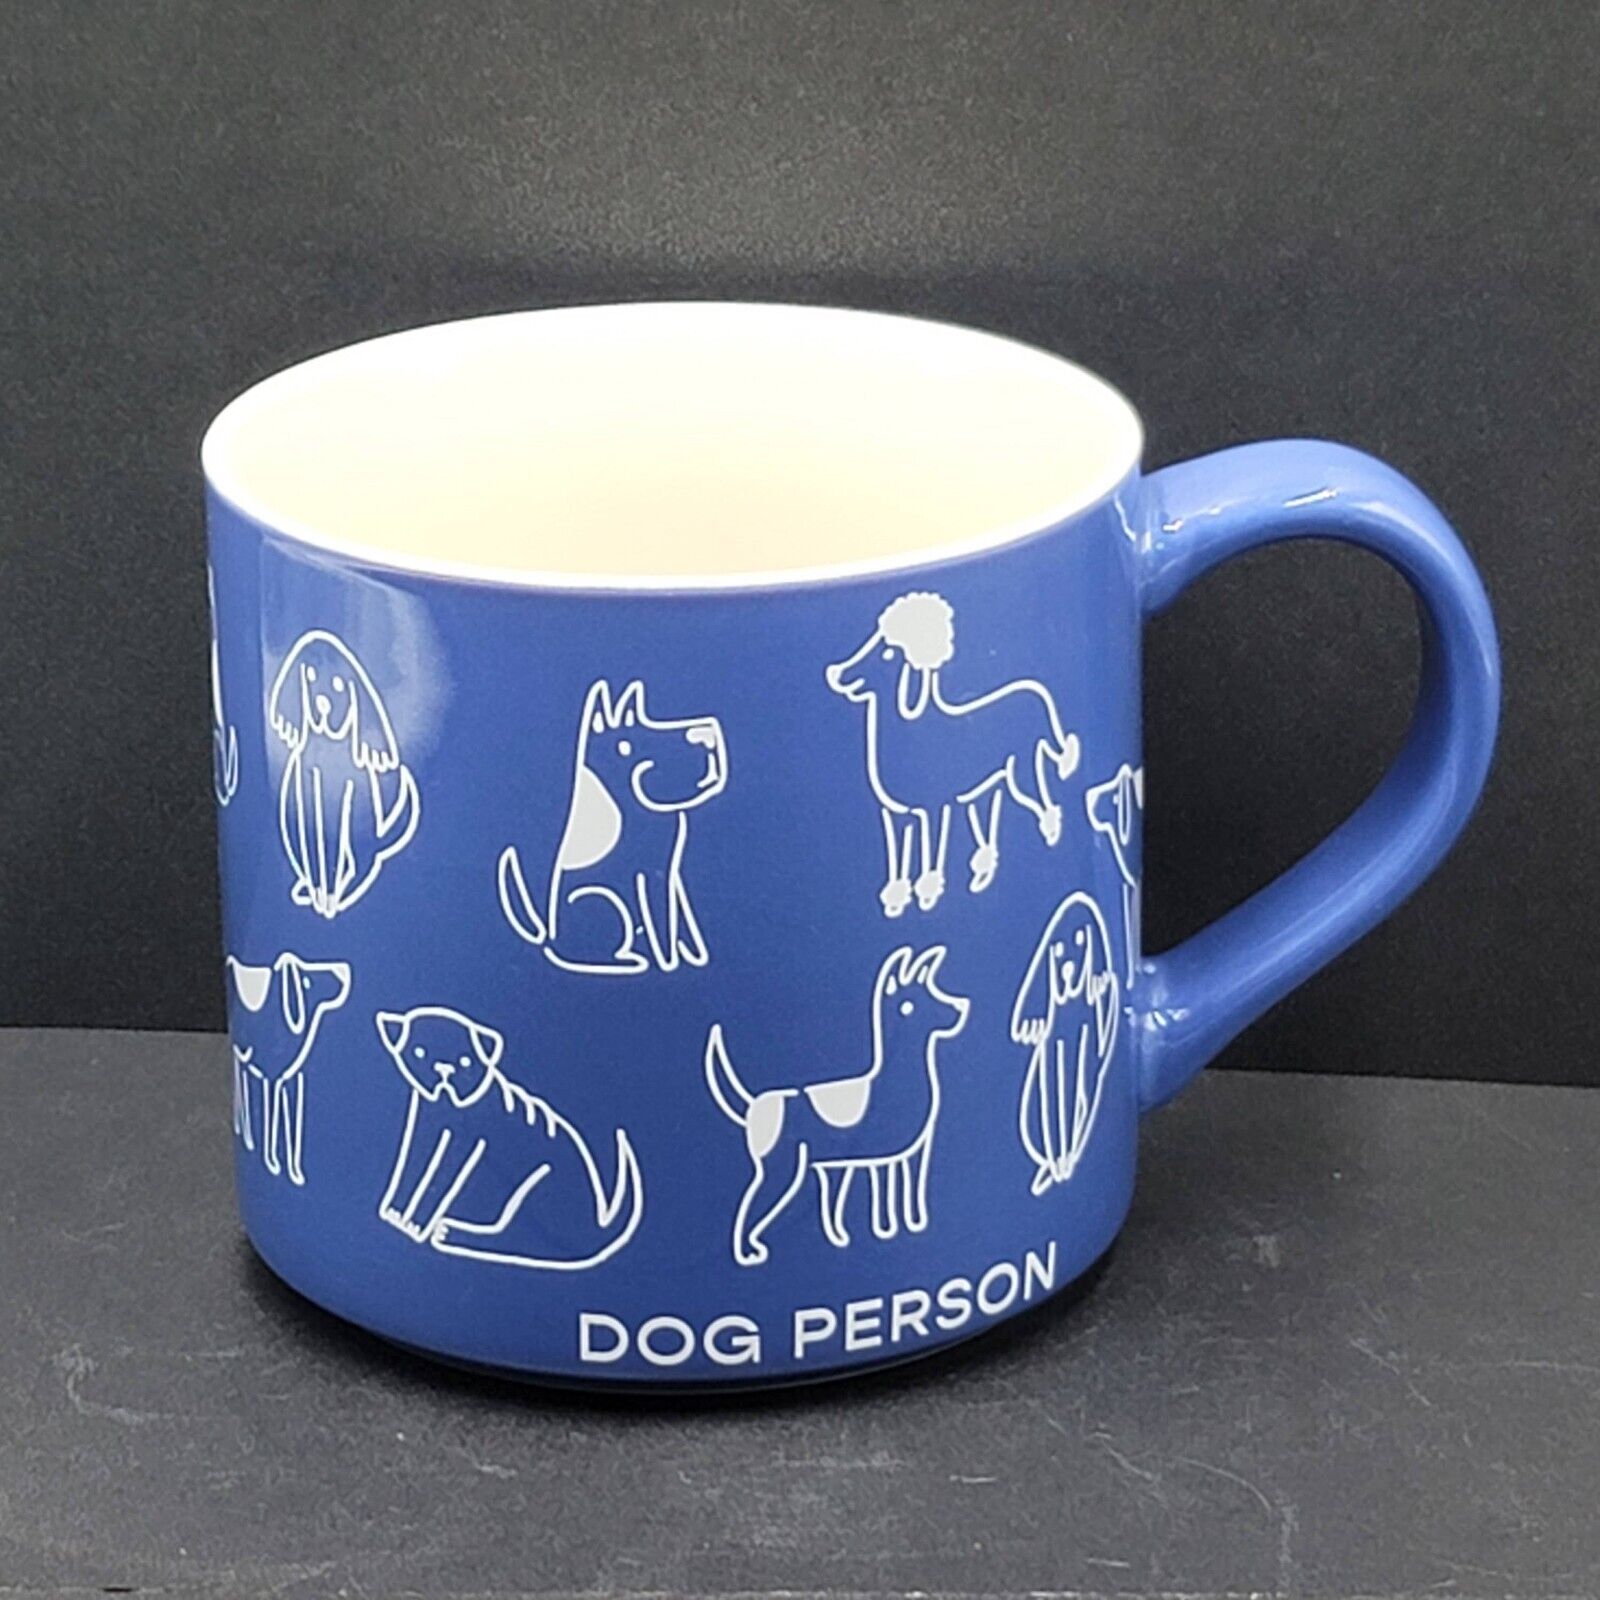 DOG PERSON Coffee Tea Mug Blue by PARKER LANE 16 oz Large Stoneware Cup NEW